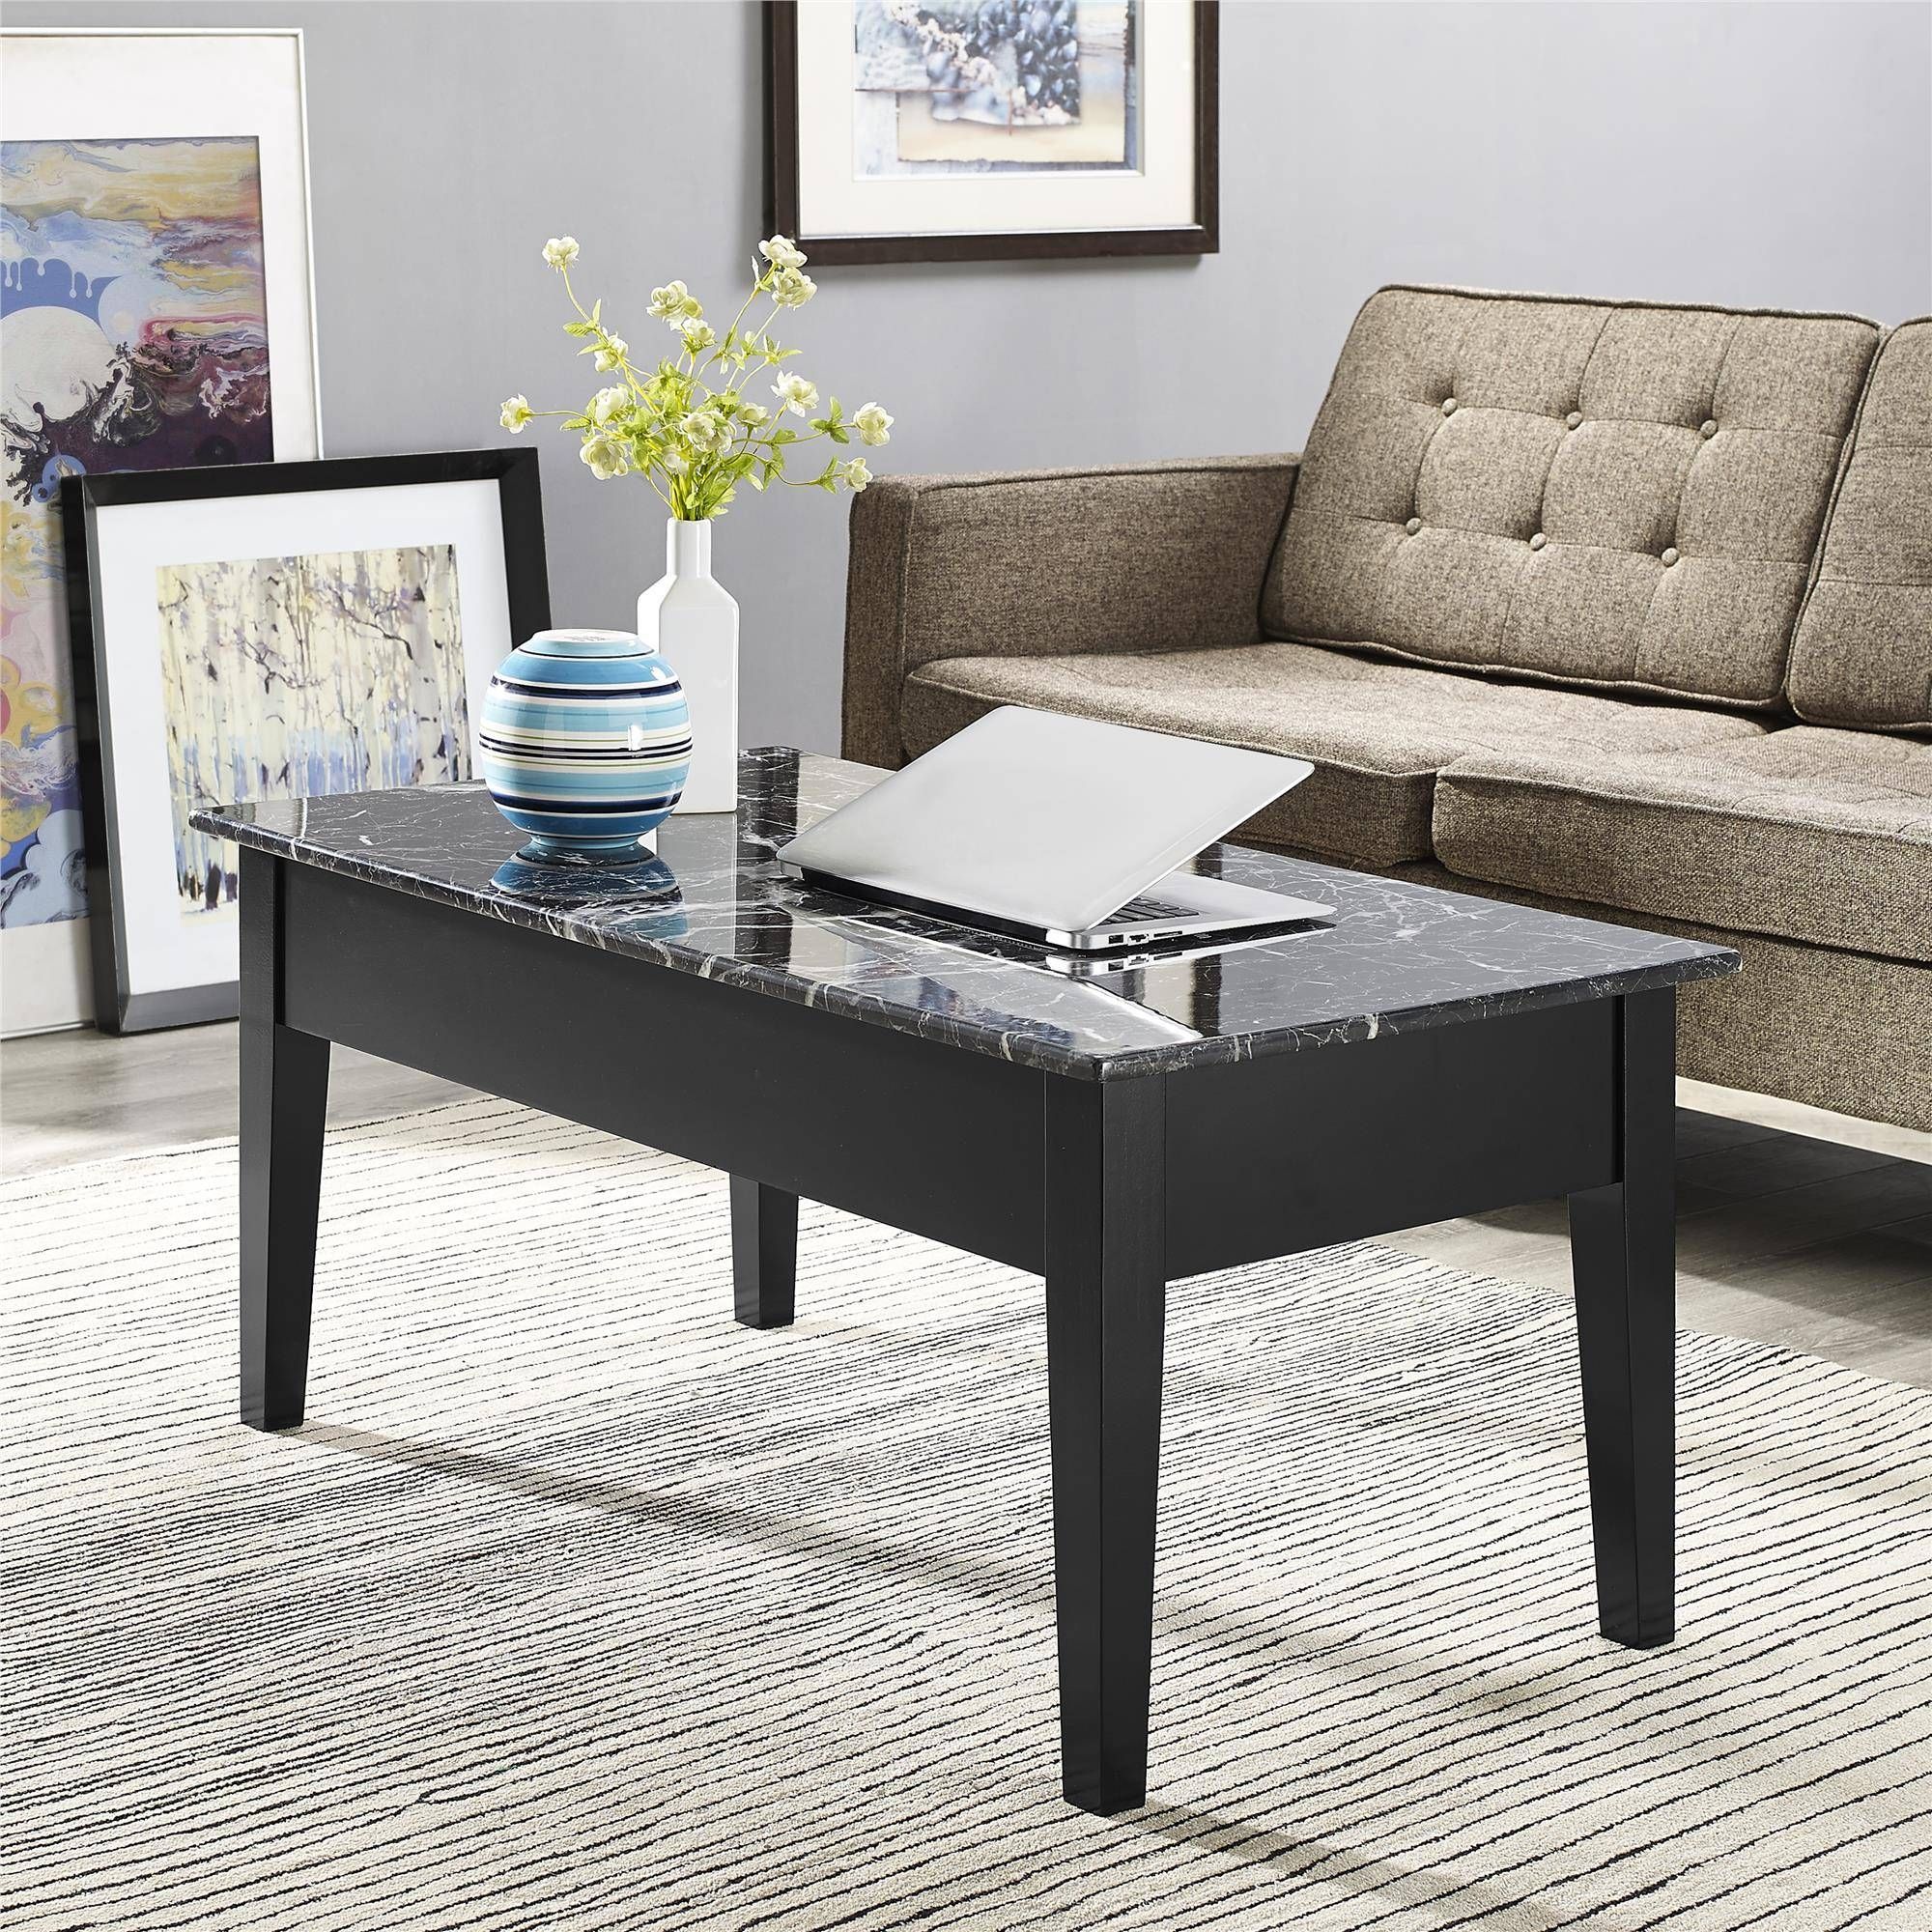 Dorel Living | Faux Marble Lift Top Coffee Table, Black In Black And Grey Marble Coffee Tables (View 15 of 30)